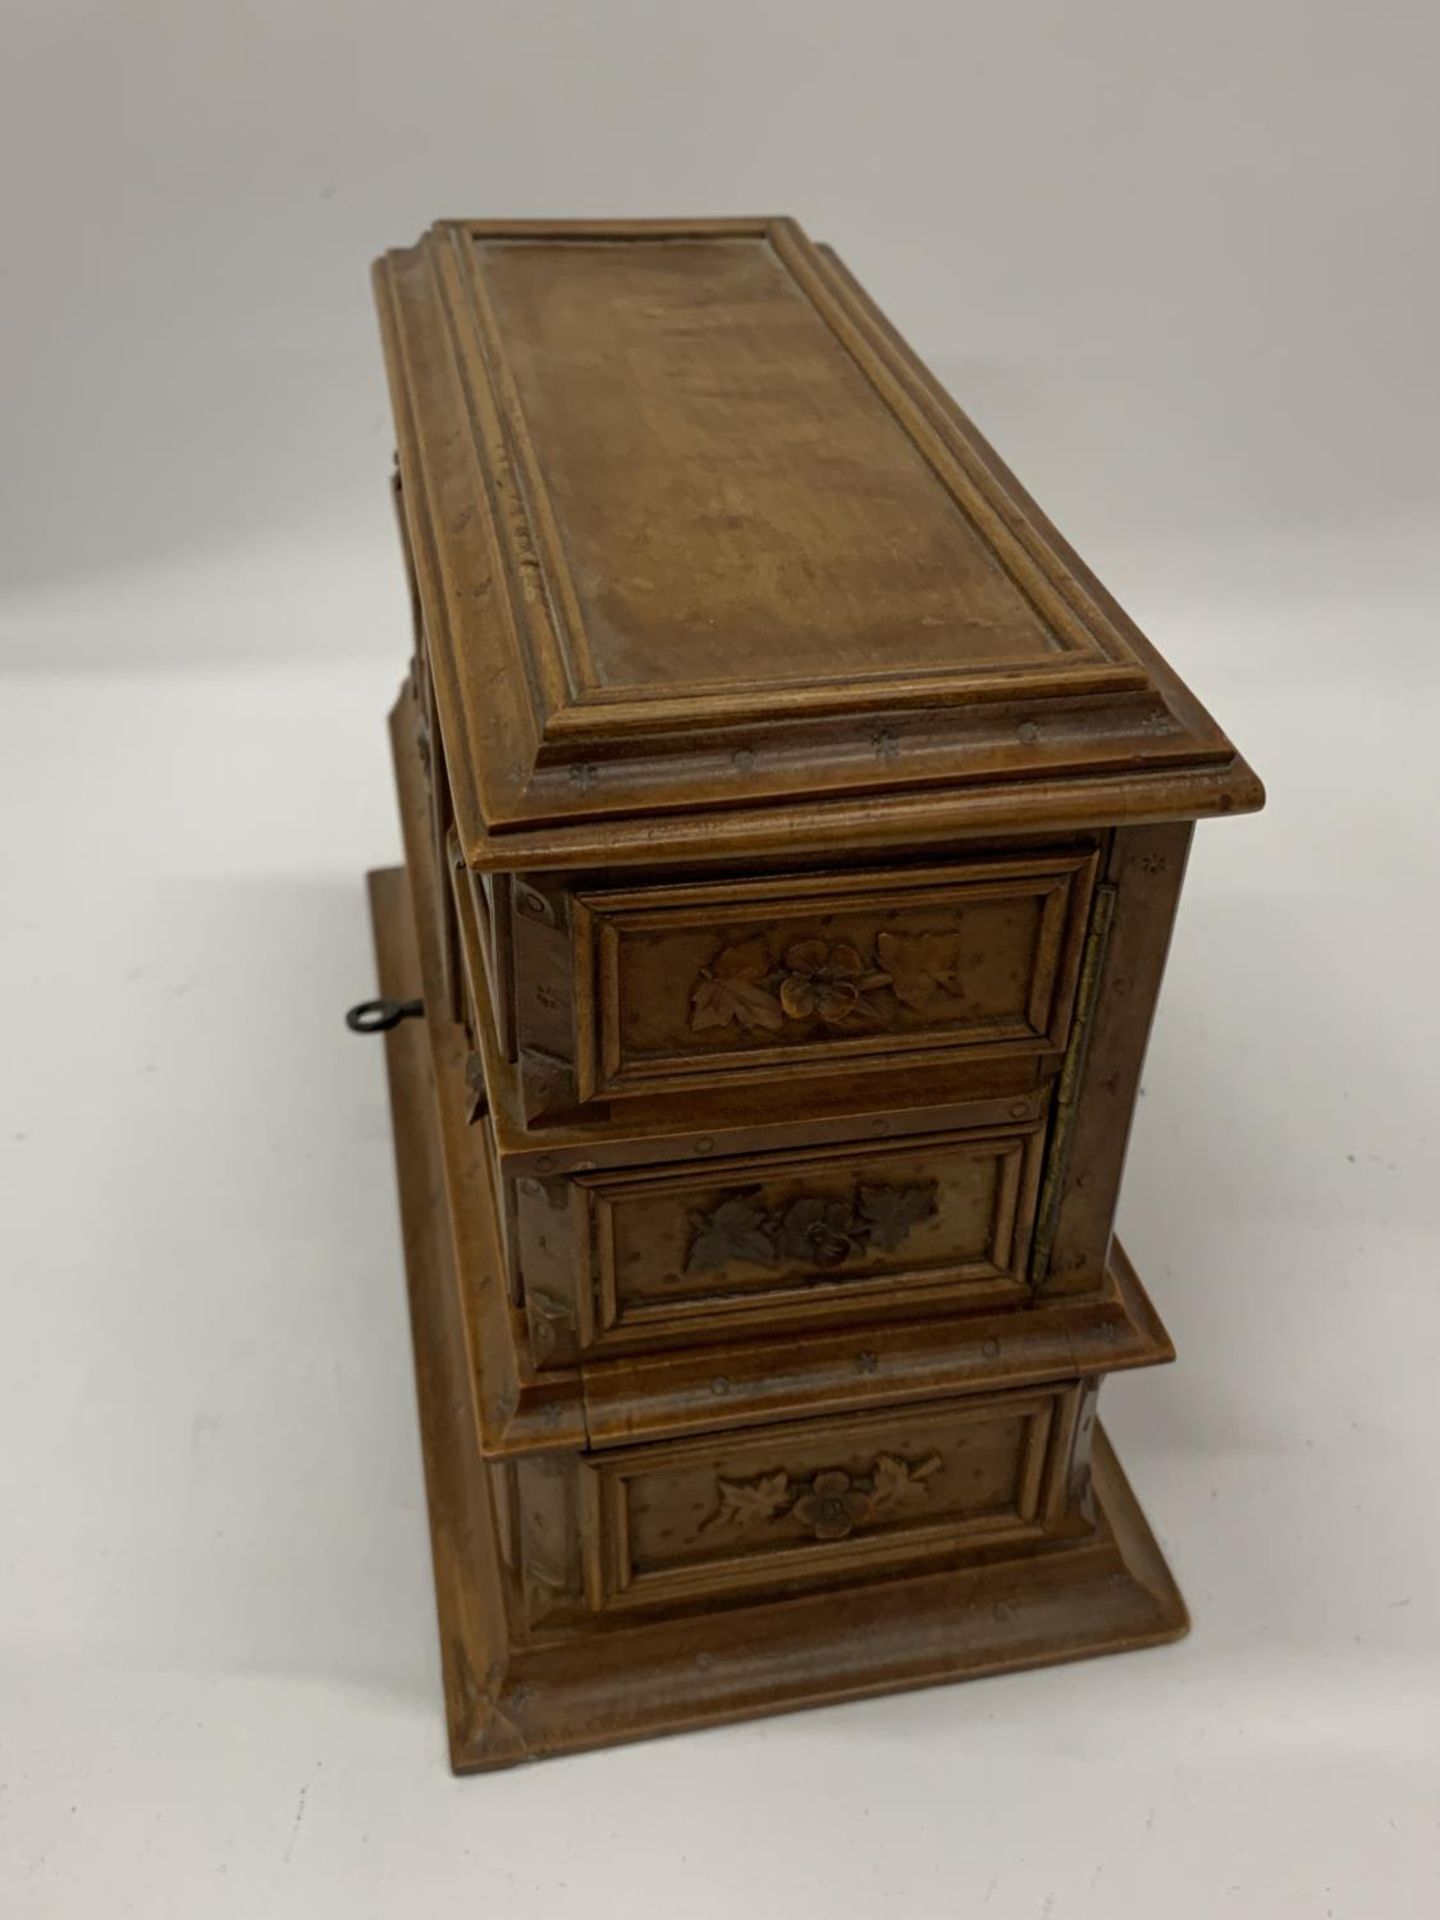 A CARVED SATINWOOD TABLE TOP SEWING CABINET WITH LIFT UP LID AND INNER DRAWERS, HEIGHT 17CM - Image 6 of 6